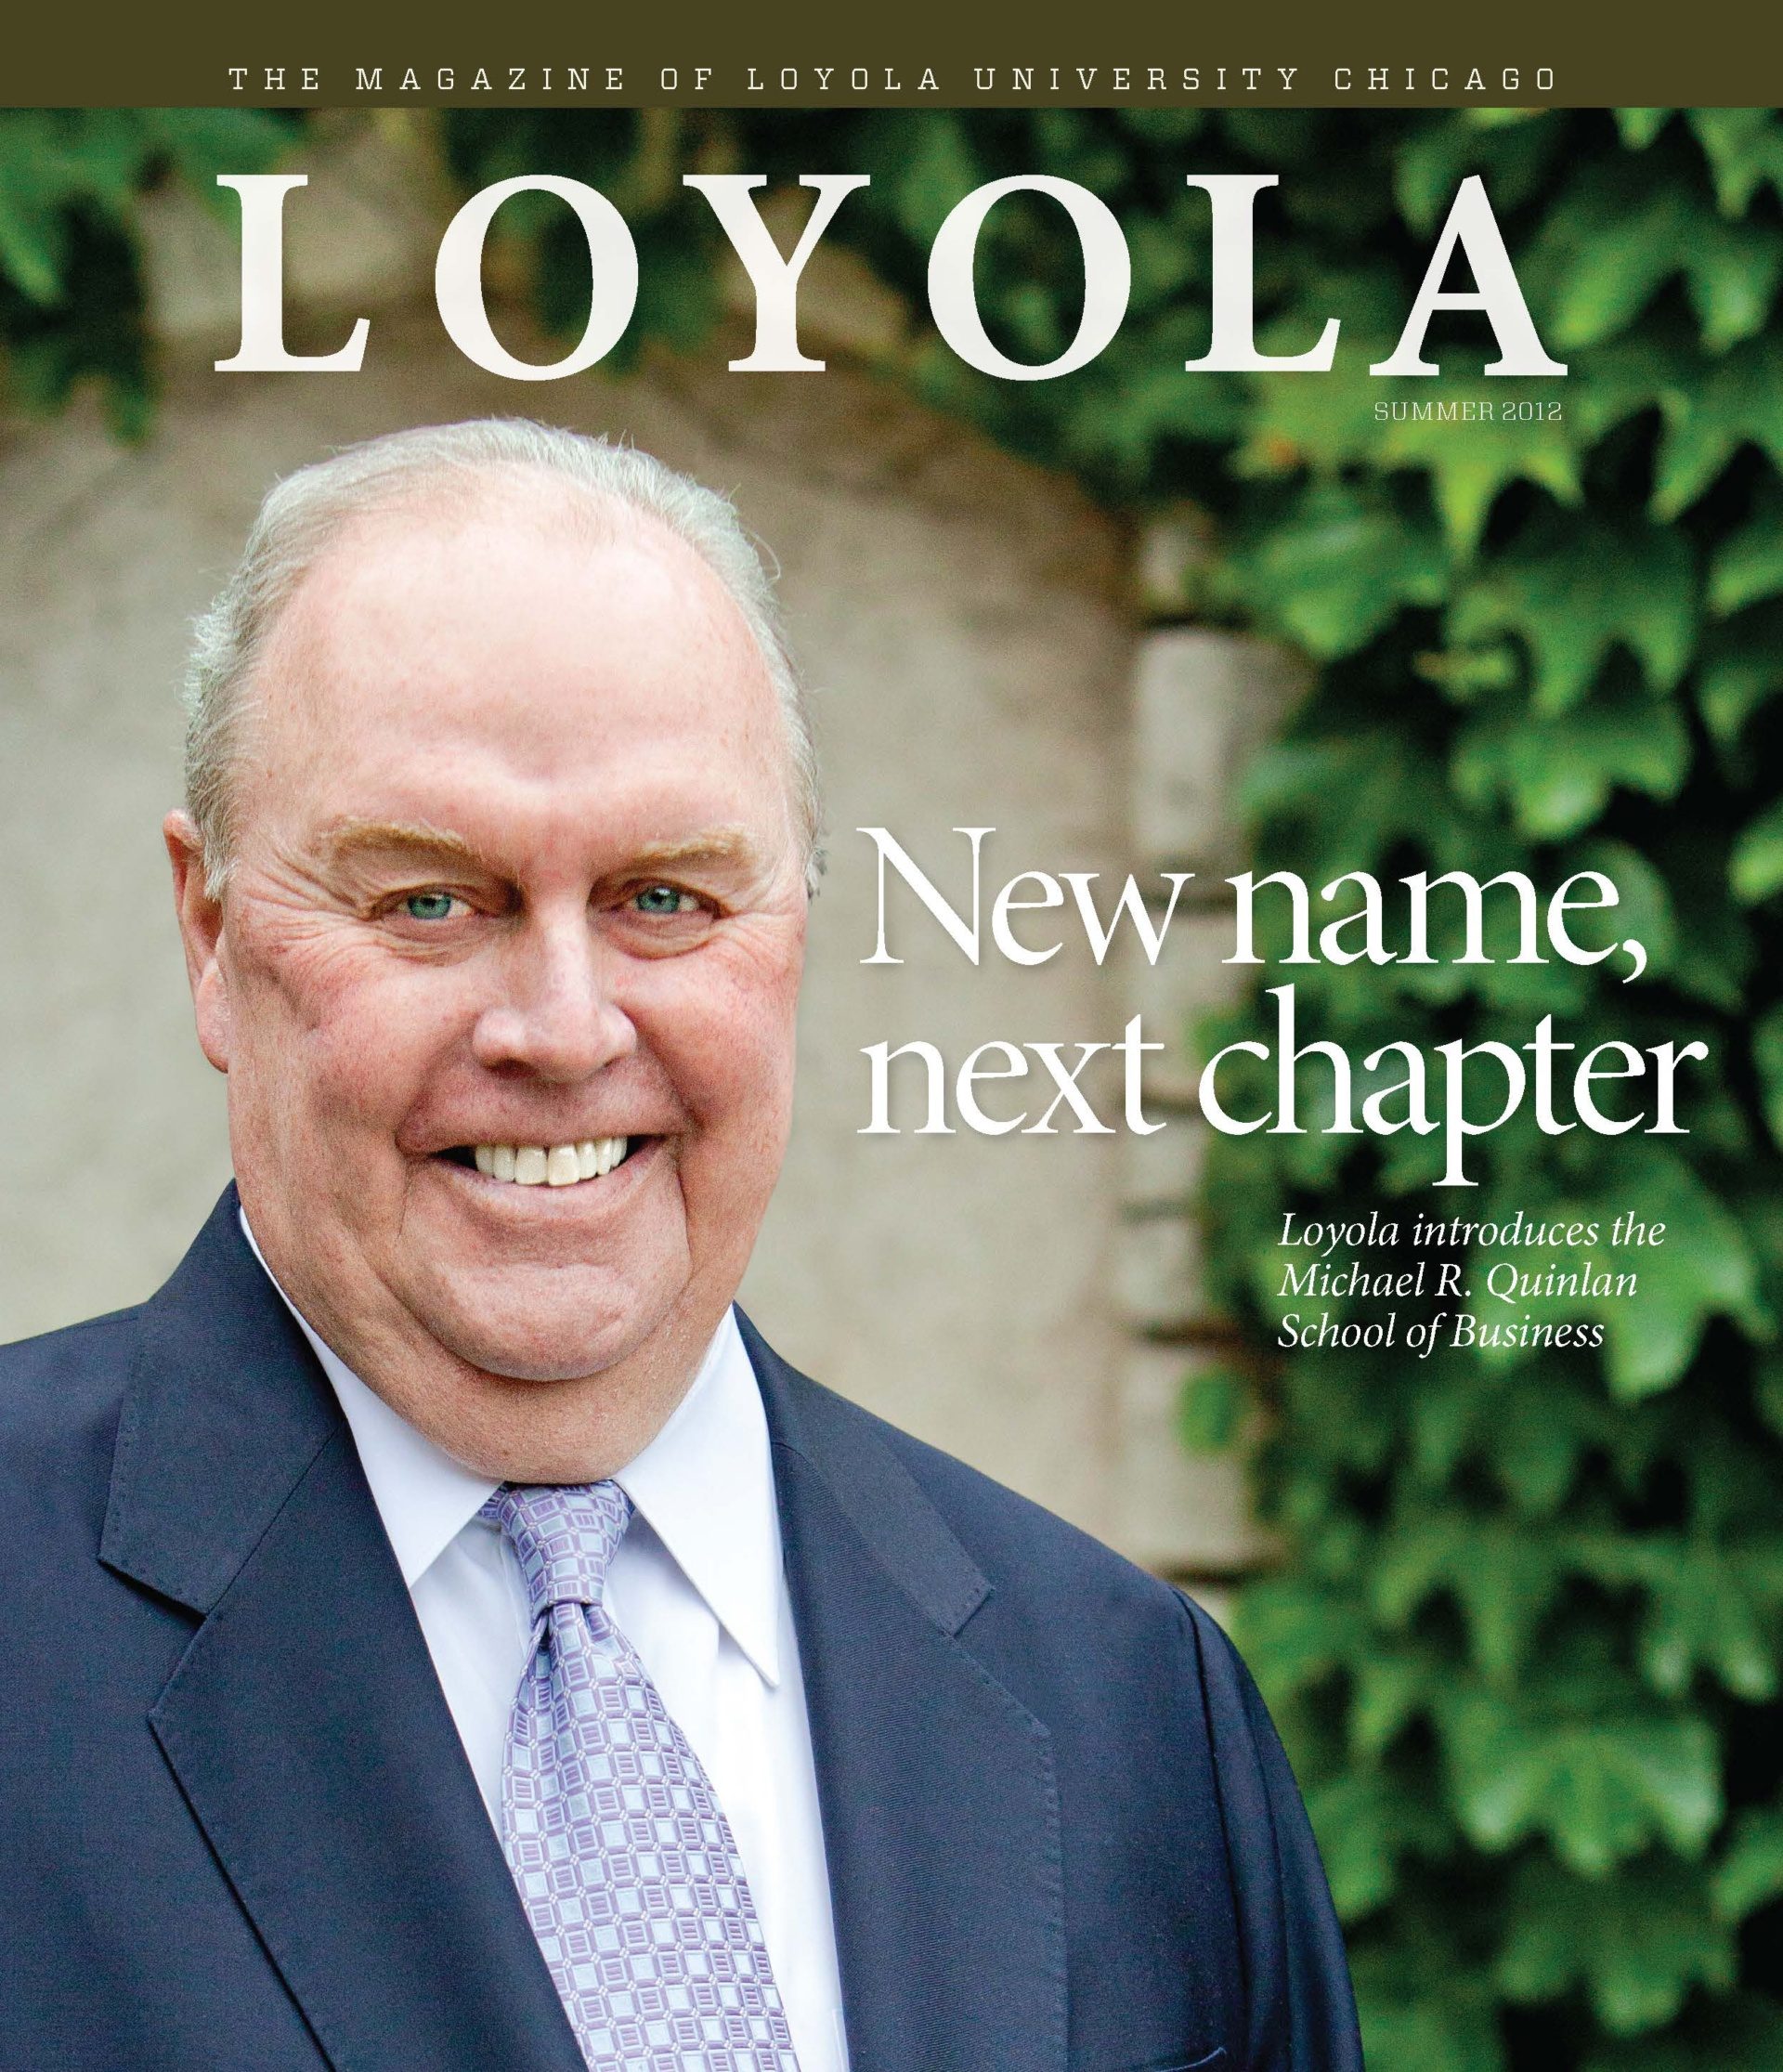 The summer 2012 Loyola magazine cover with a smiling man standing in front of an ivy wall and the text 